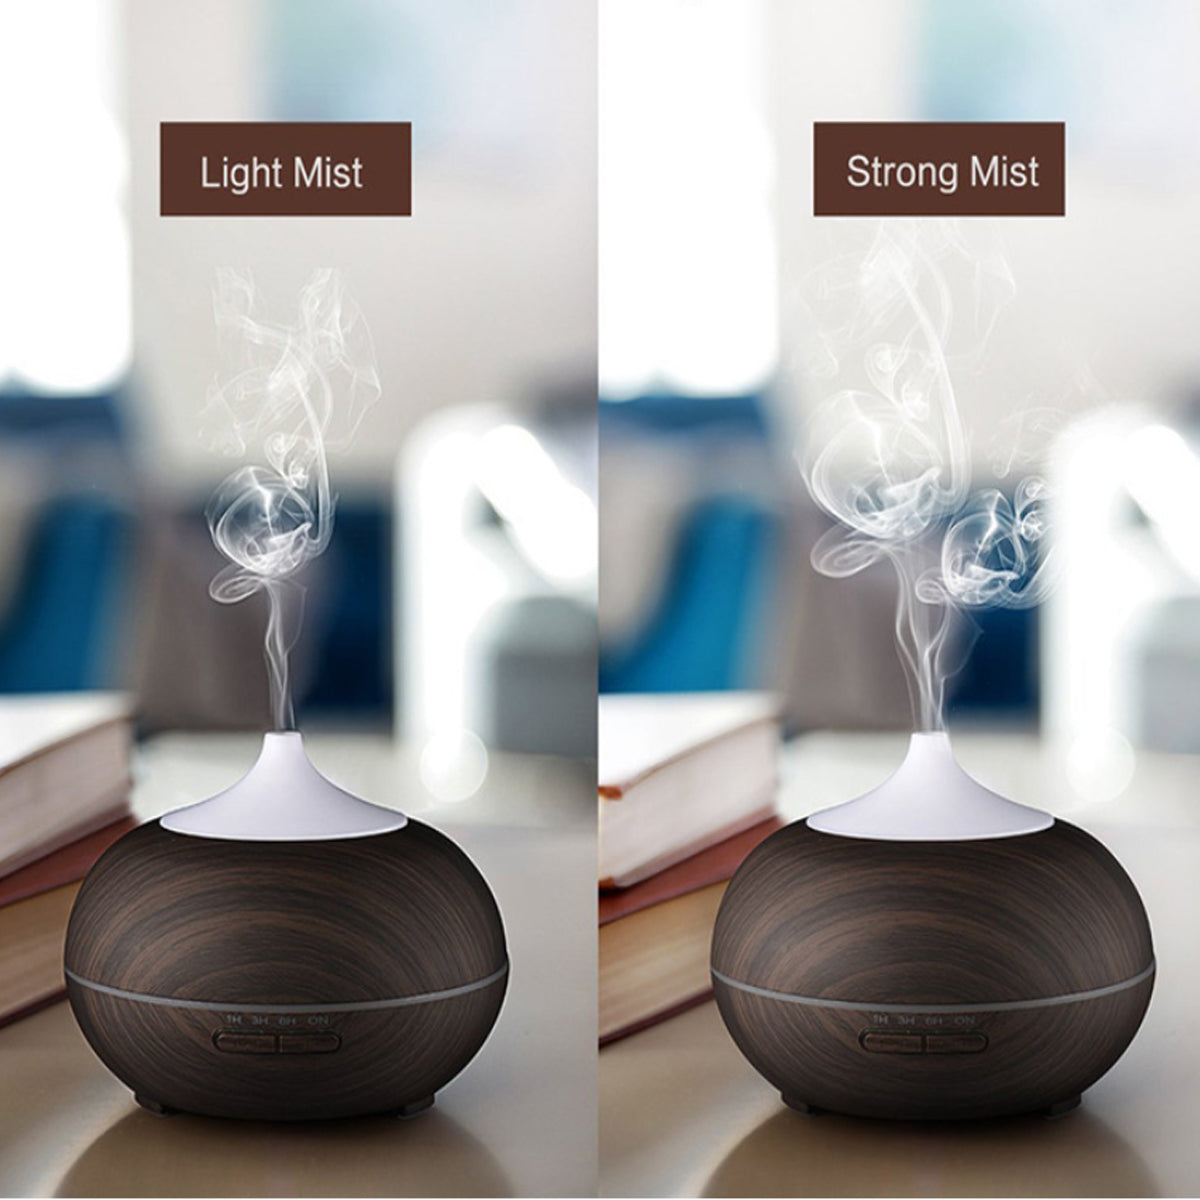  Mistyrious Essential Oil Humidifier Natural Oak Design With Easy Remote by VistaShops VistaShops Perfumarie